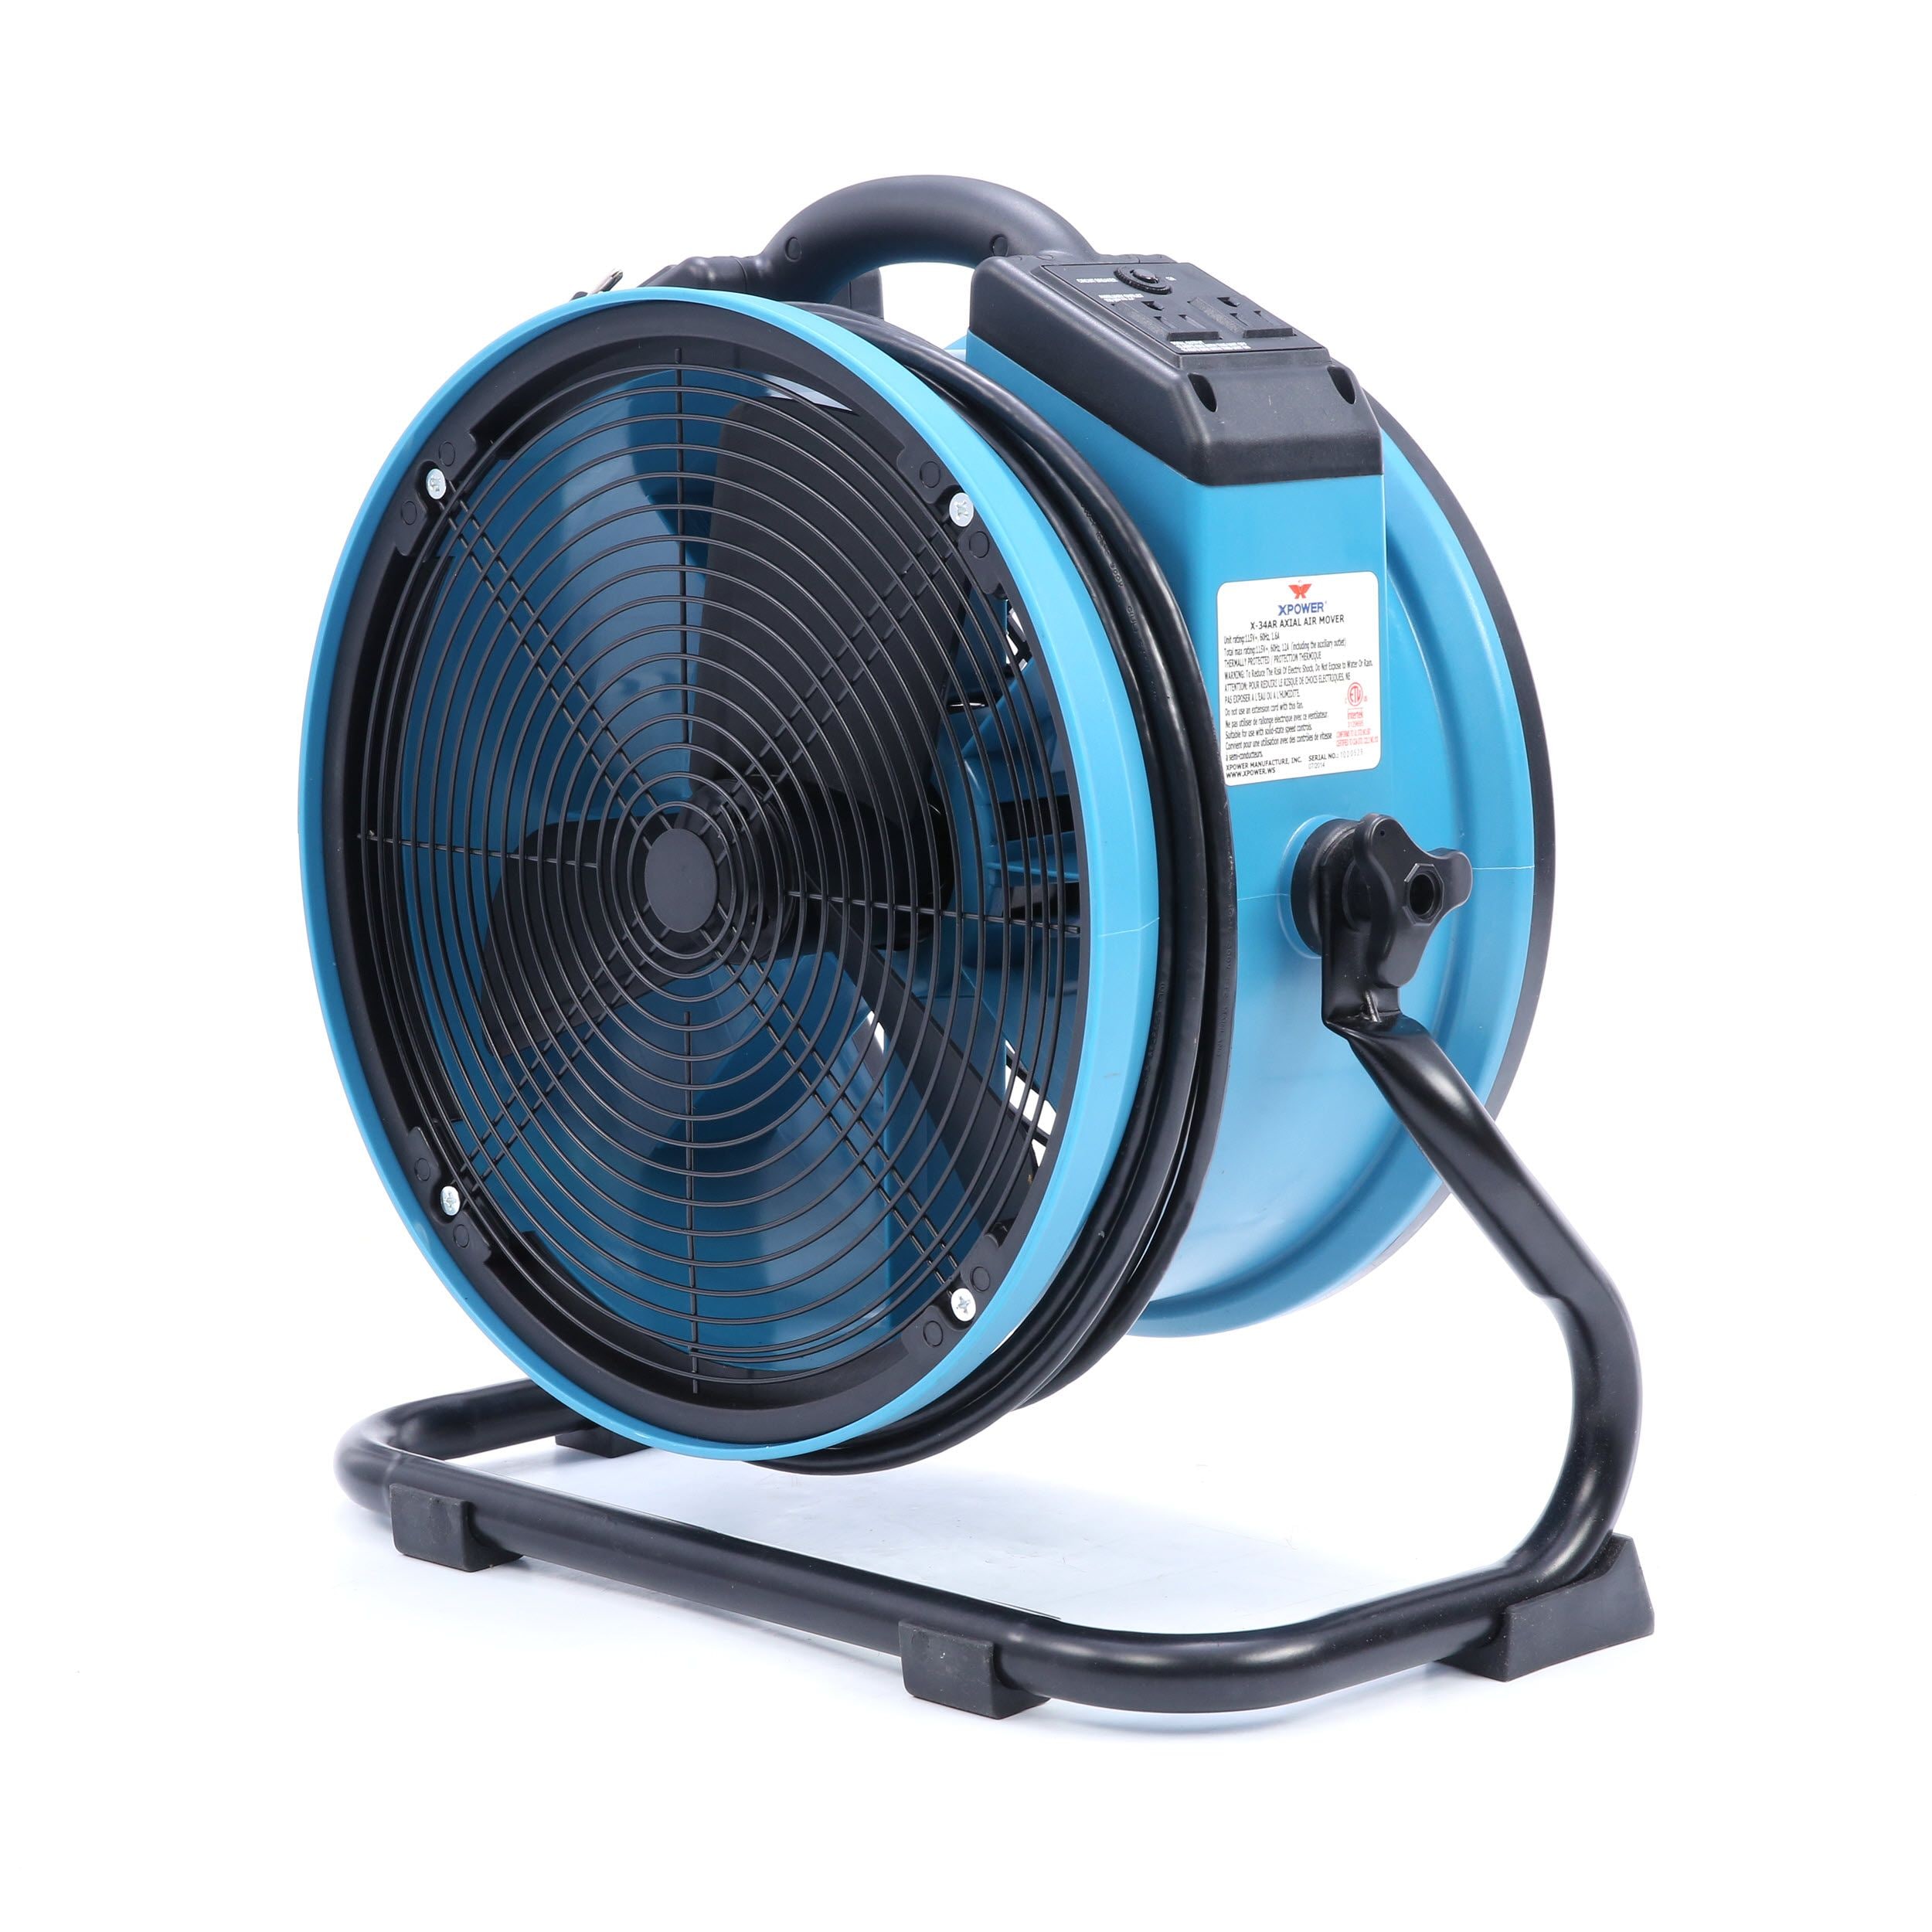 Details about   XPOWER X-34AR 1/4 HP Industrial Sealed Motor Axial Fan Floor Air Mover w Outlets